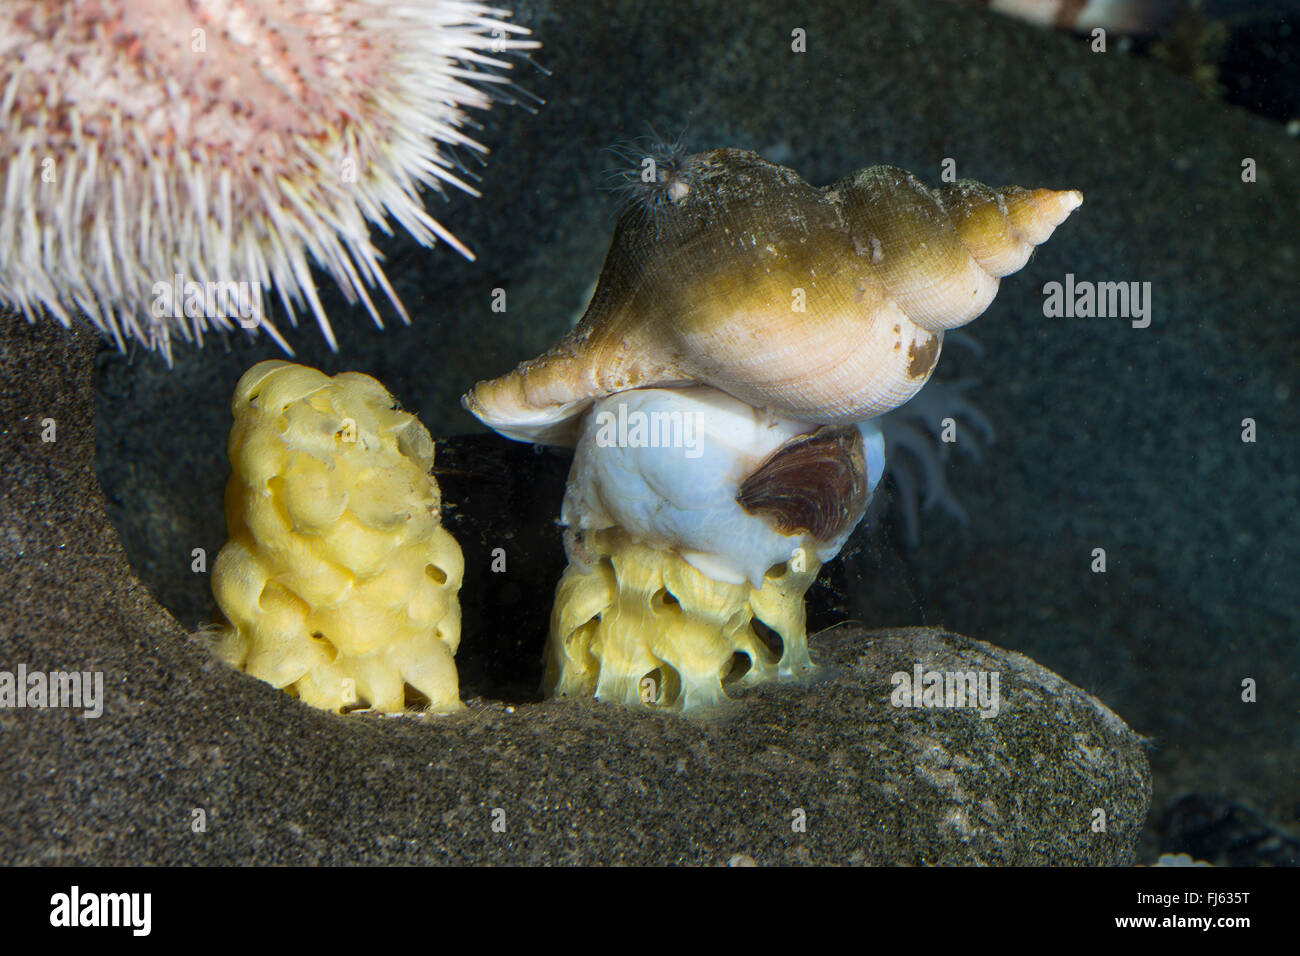 ancient whelk, ancient neptune, common spindle snail, neptune snail, red whelk, buckie (Fusus antiqua, Neptunea antiqua), laying eggs Stock Photo